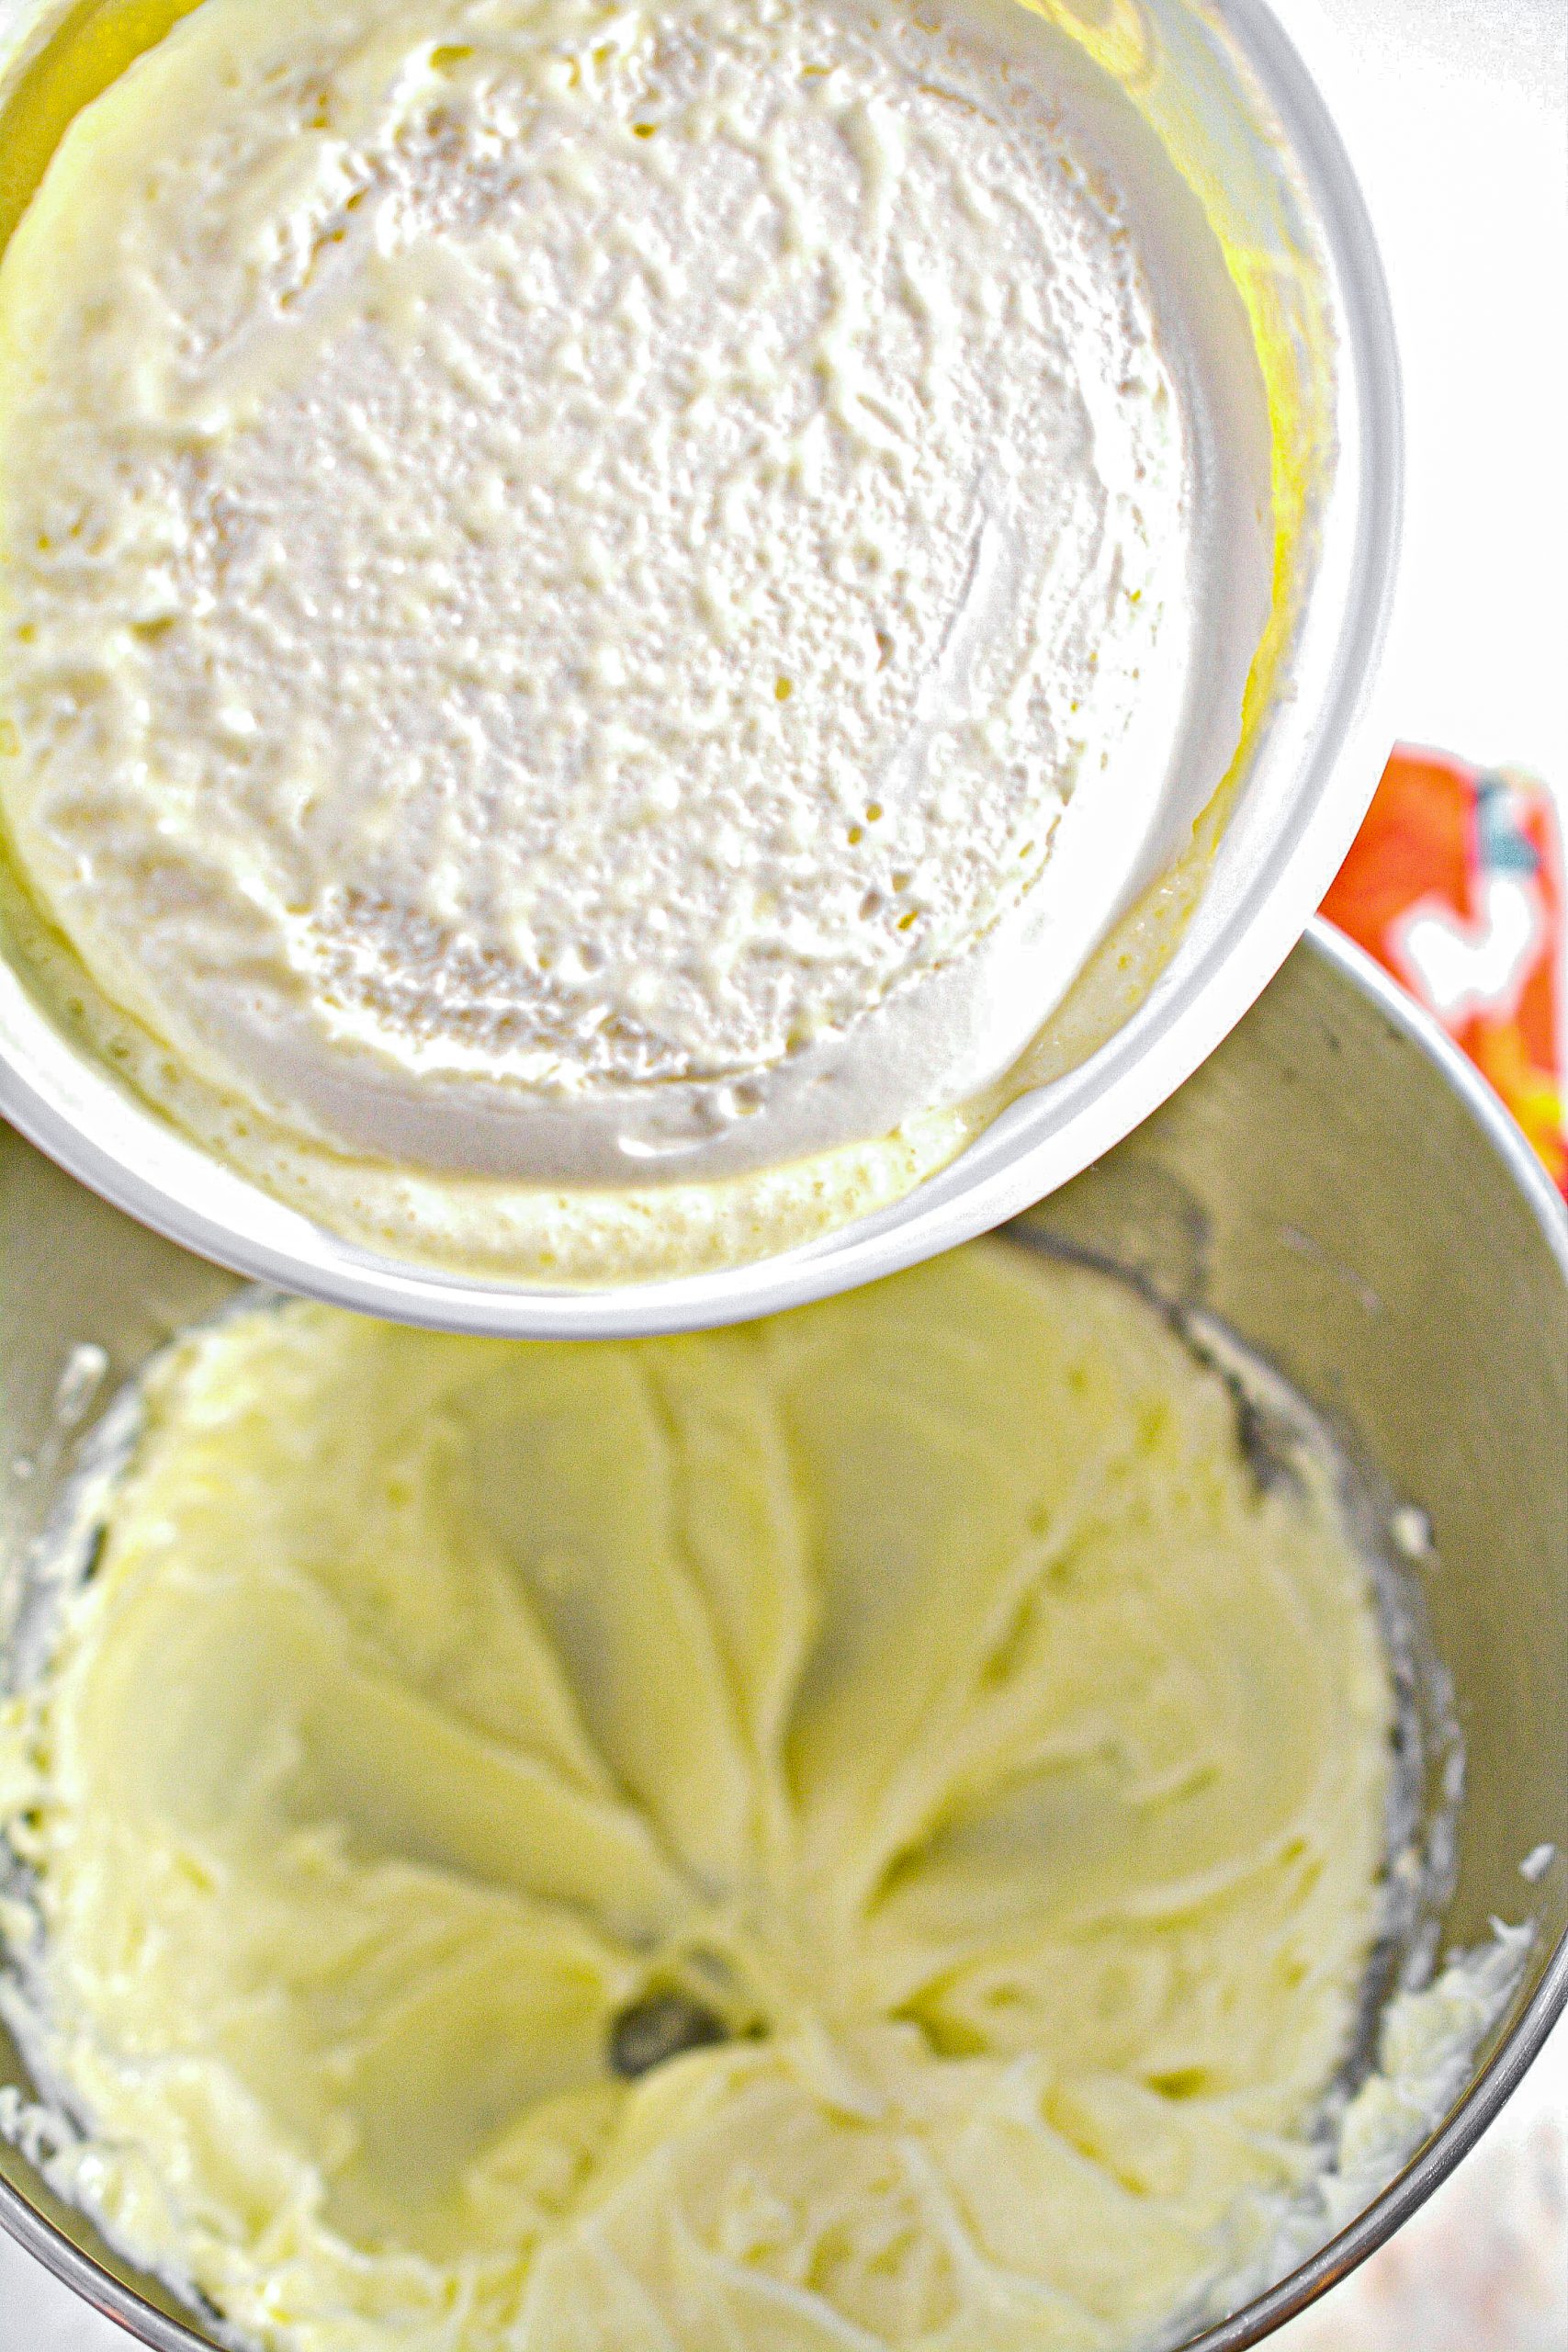 Add the whipped topping to the cream cheese and fold in to combine.